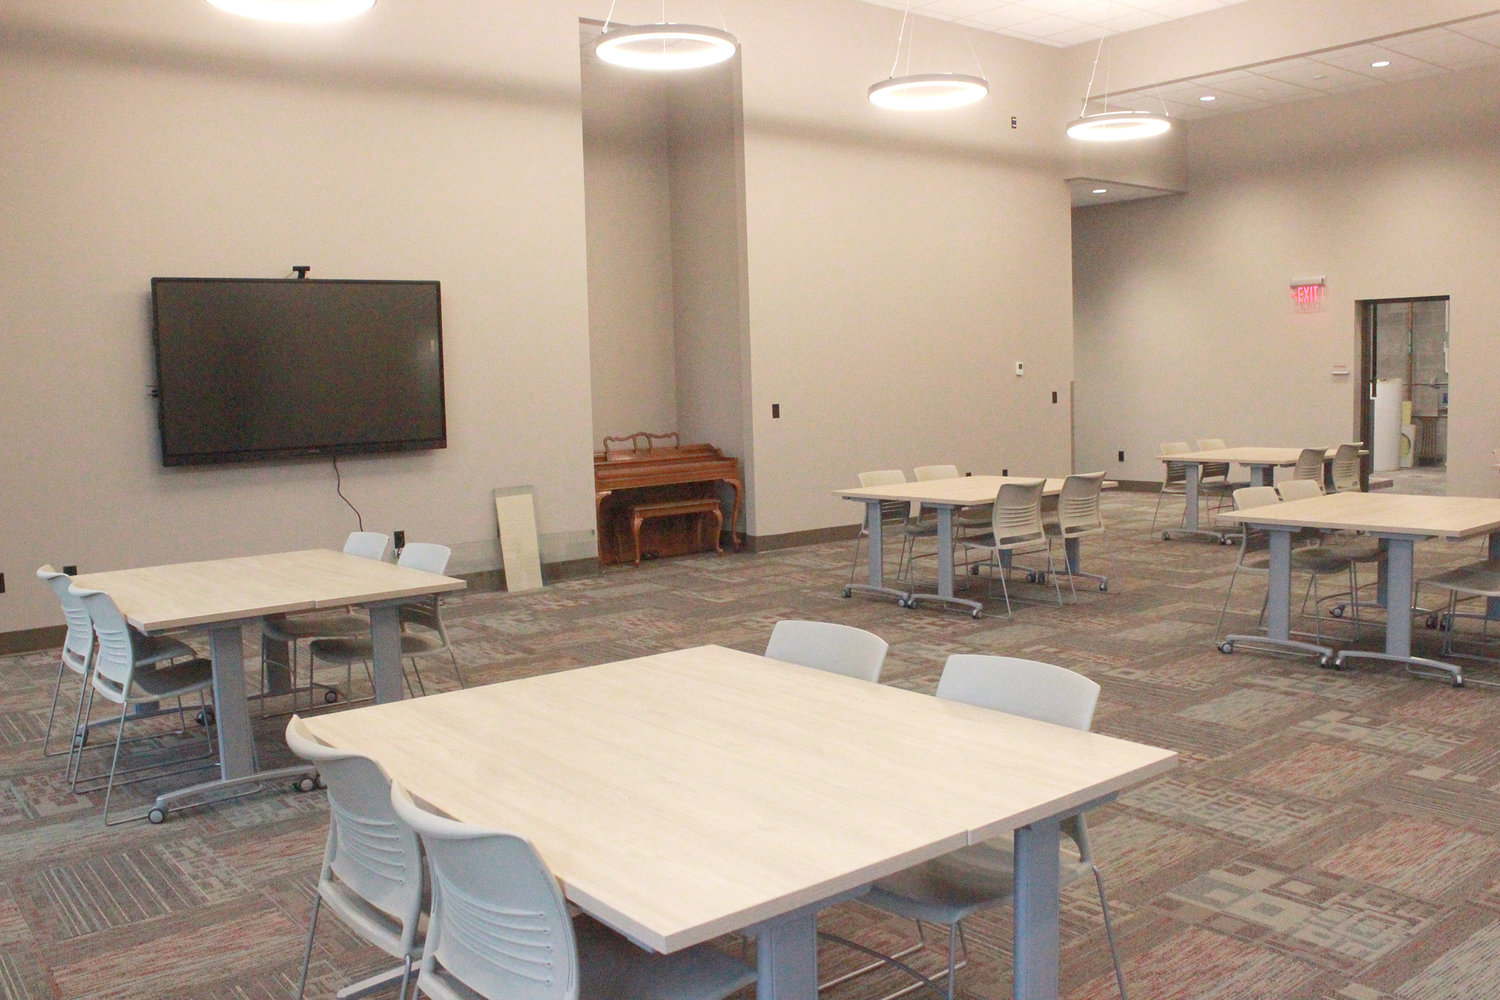 COMMUNITY ROOM — The Oneida Public Library's new community room is large, featuring a mounted computer ready for future presentations.